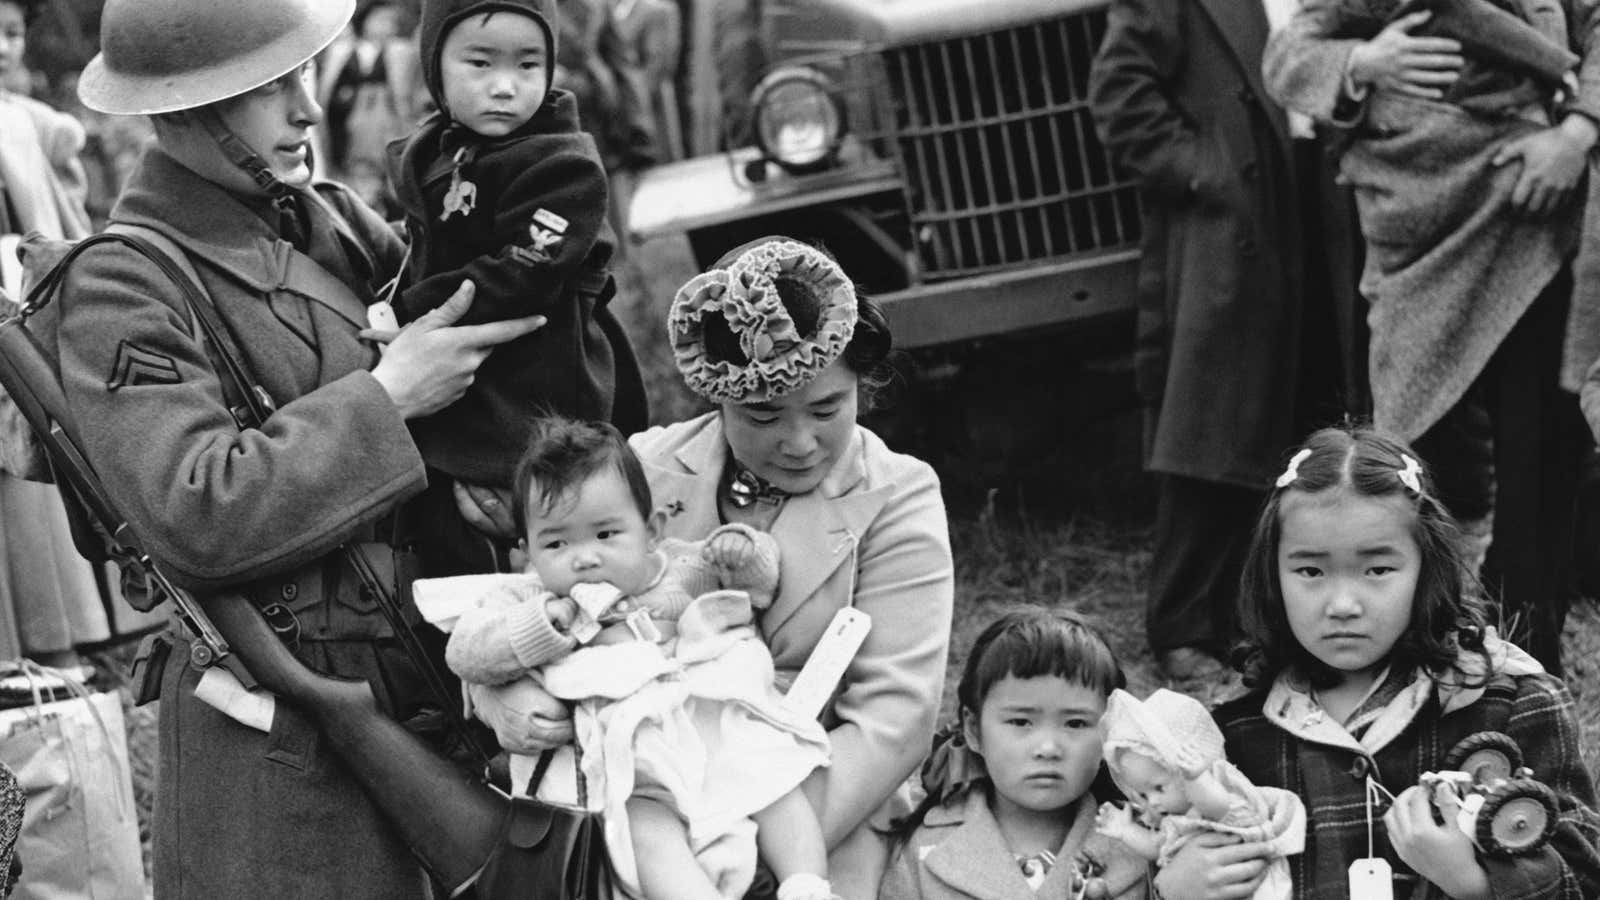 A member of the military guard holds the youngest child of Shigeho Kitamoto, center, as she and her children are evacuated from Bainbridge Island, WA, in March of 1942.